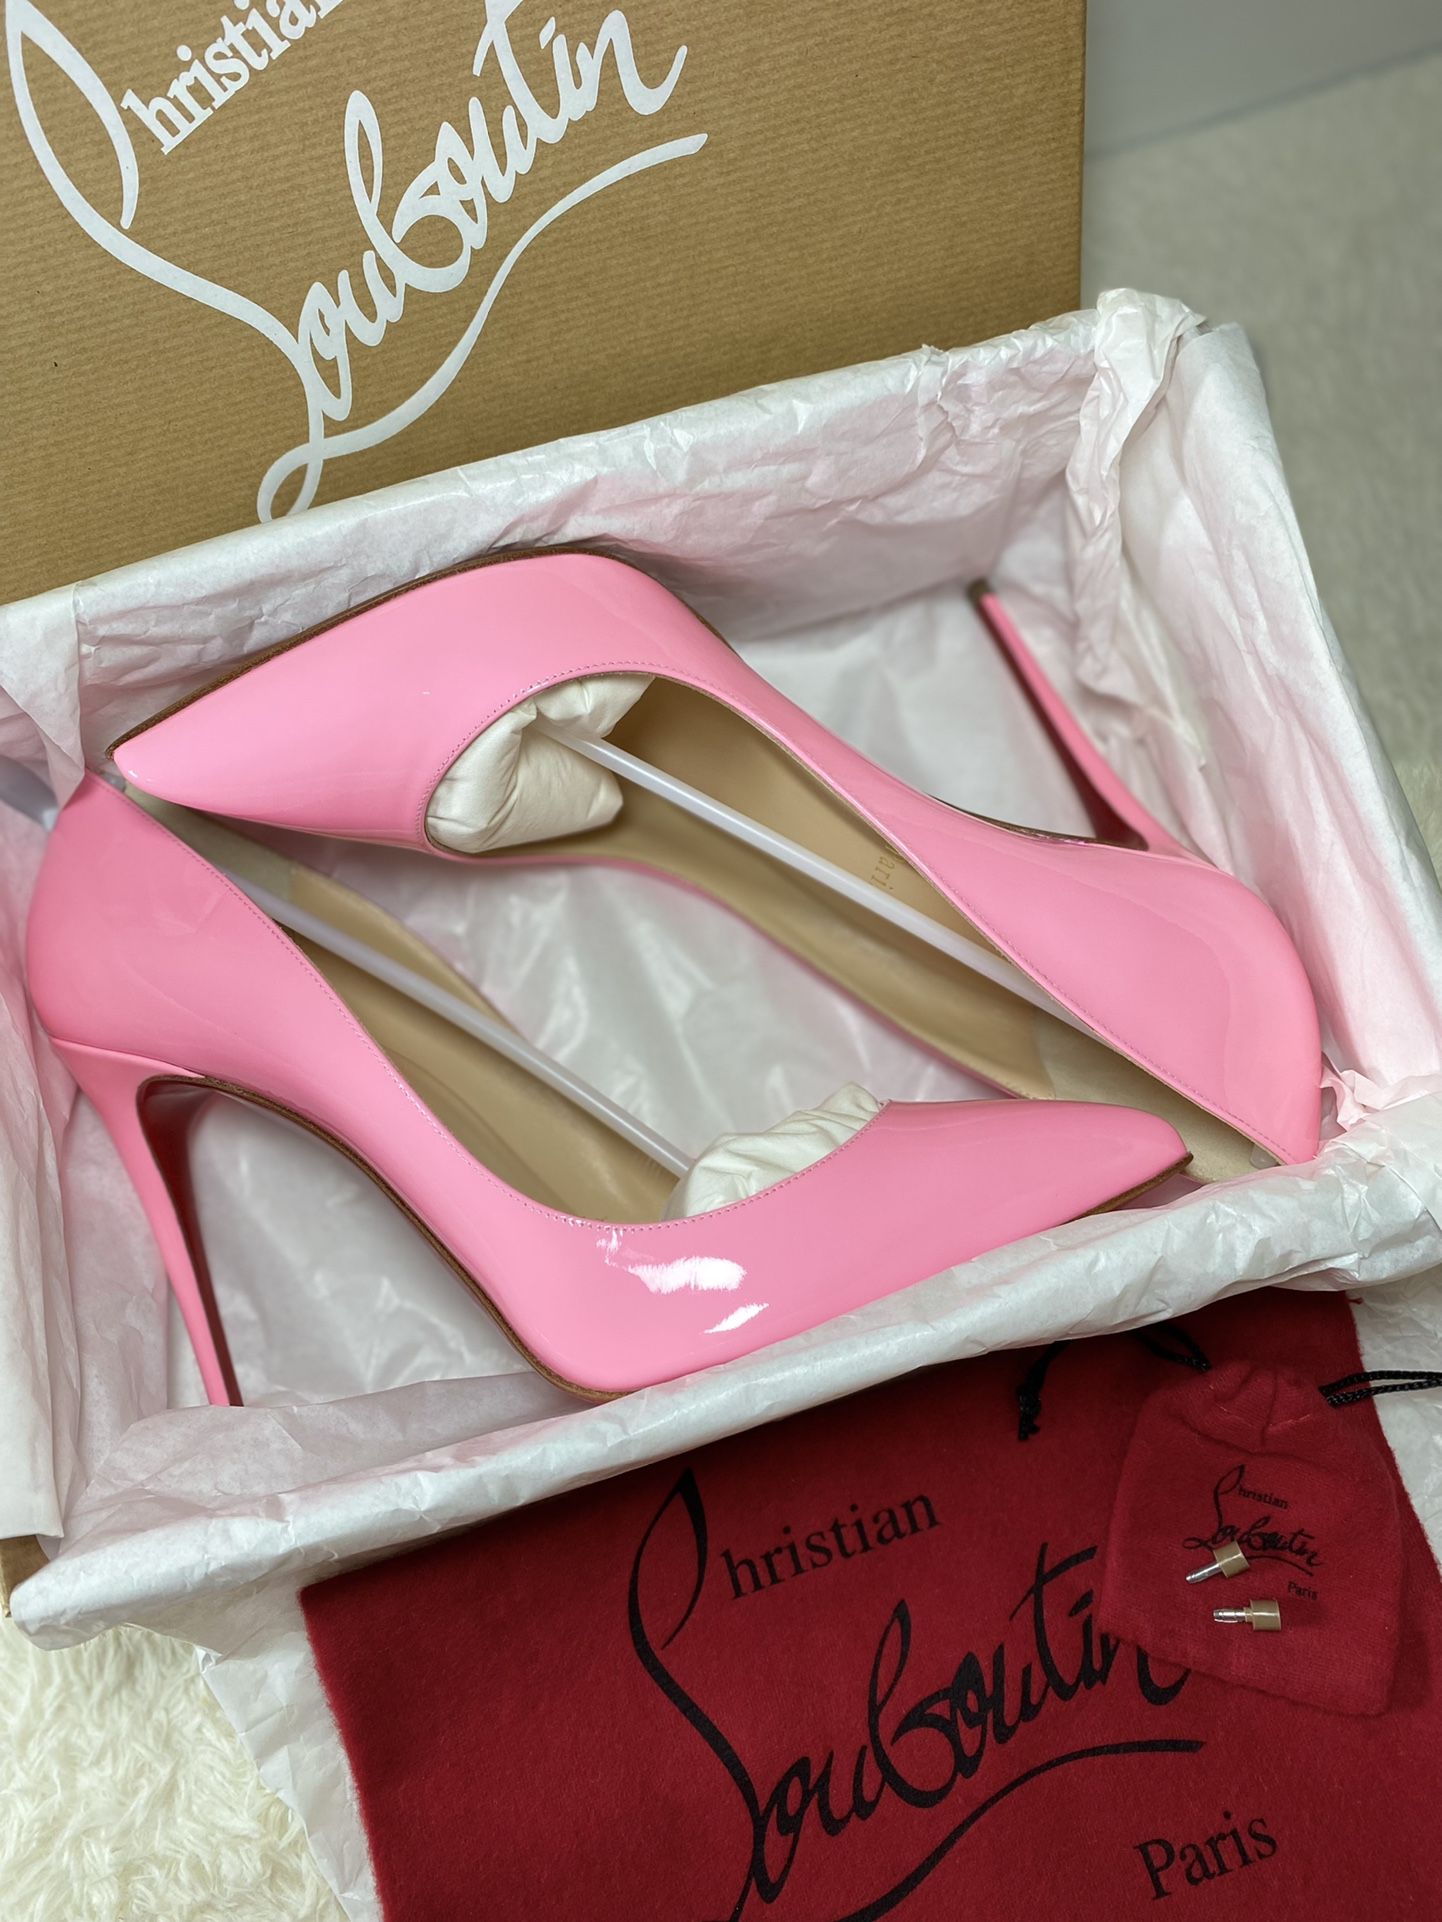 Christian Louboutin Pigalle Follies 100 Patent